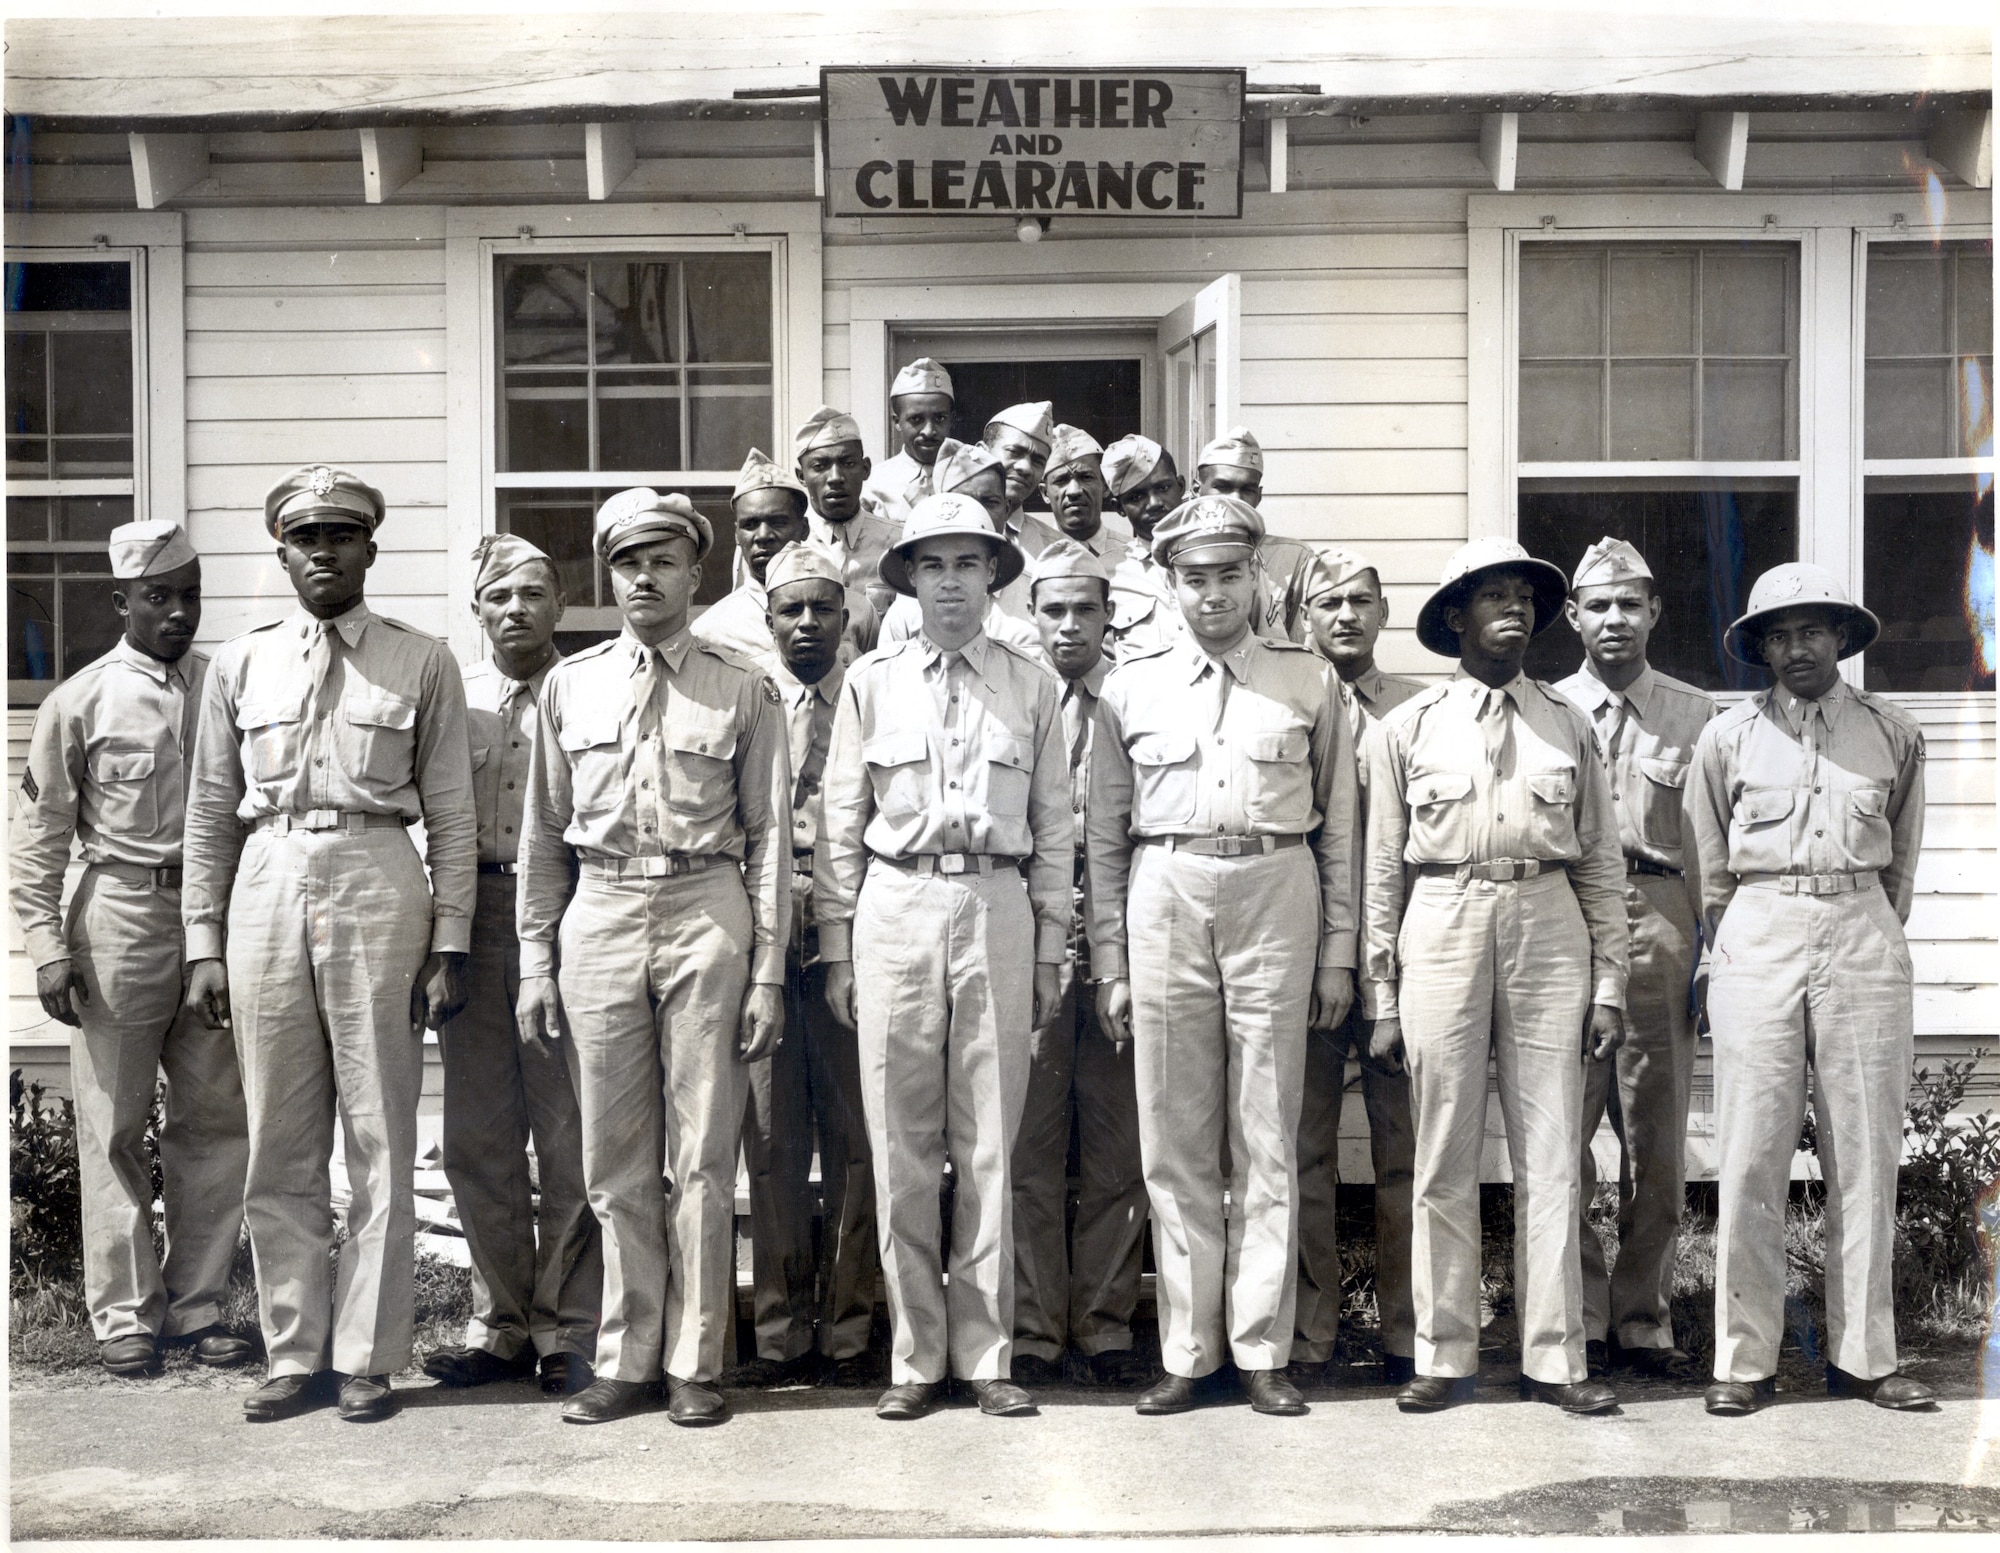 Personnel of the Tuskegee weather detachment, circa 1944. (Front row, left to right) Lt. Grant Franklin, Lt. Archie Williams, Capt. Wallace Reed, Lt. John Branche, Lt. Paul Wise and Lt. Robert Preer. (courtesy photo)